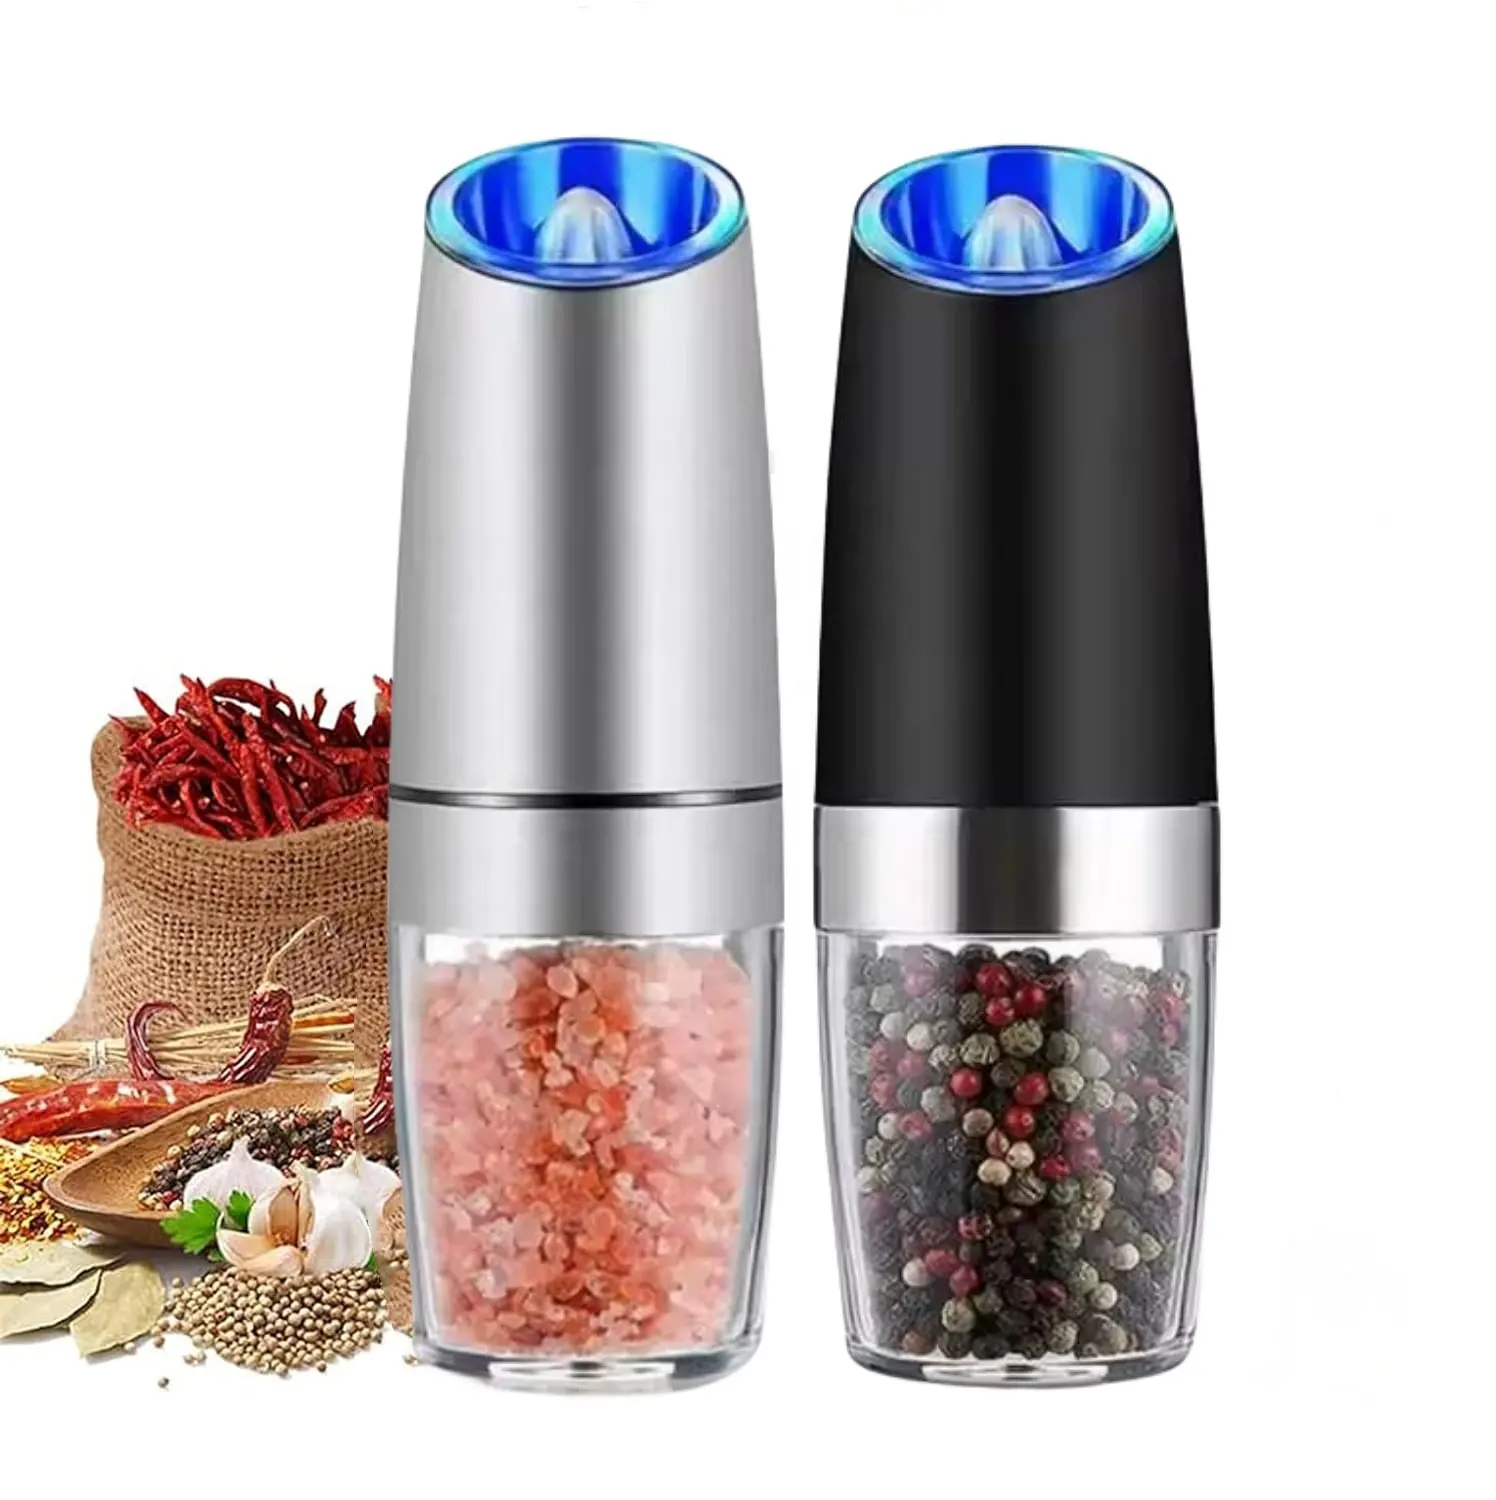 Automatic Seasoning Spice Grinder Gravity Salt Pepper Bottle Mill Ceramic Core Stainless Steel Electric Chili Pepper Grinder